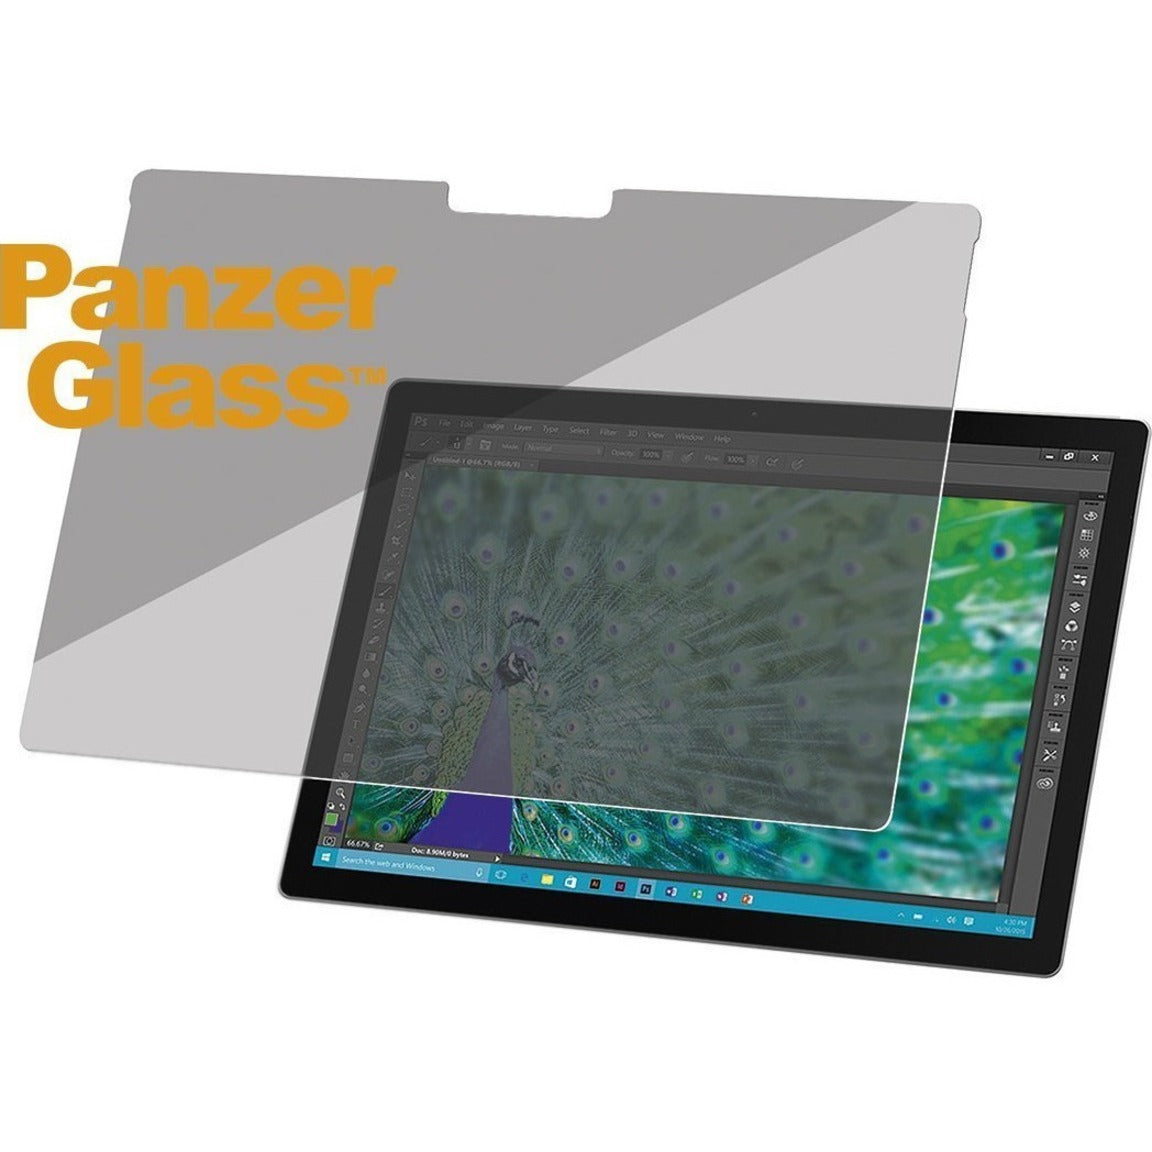 PanzerGlass P6252 Privacy Screen Filter, Blue Light Reduction, Anti-glare, Touch Sensitive, 13.5" LCD Compatible